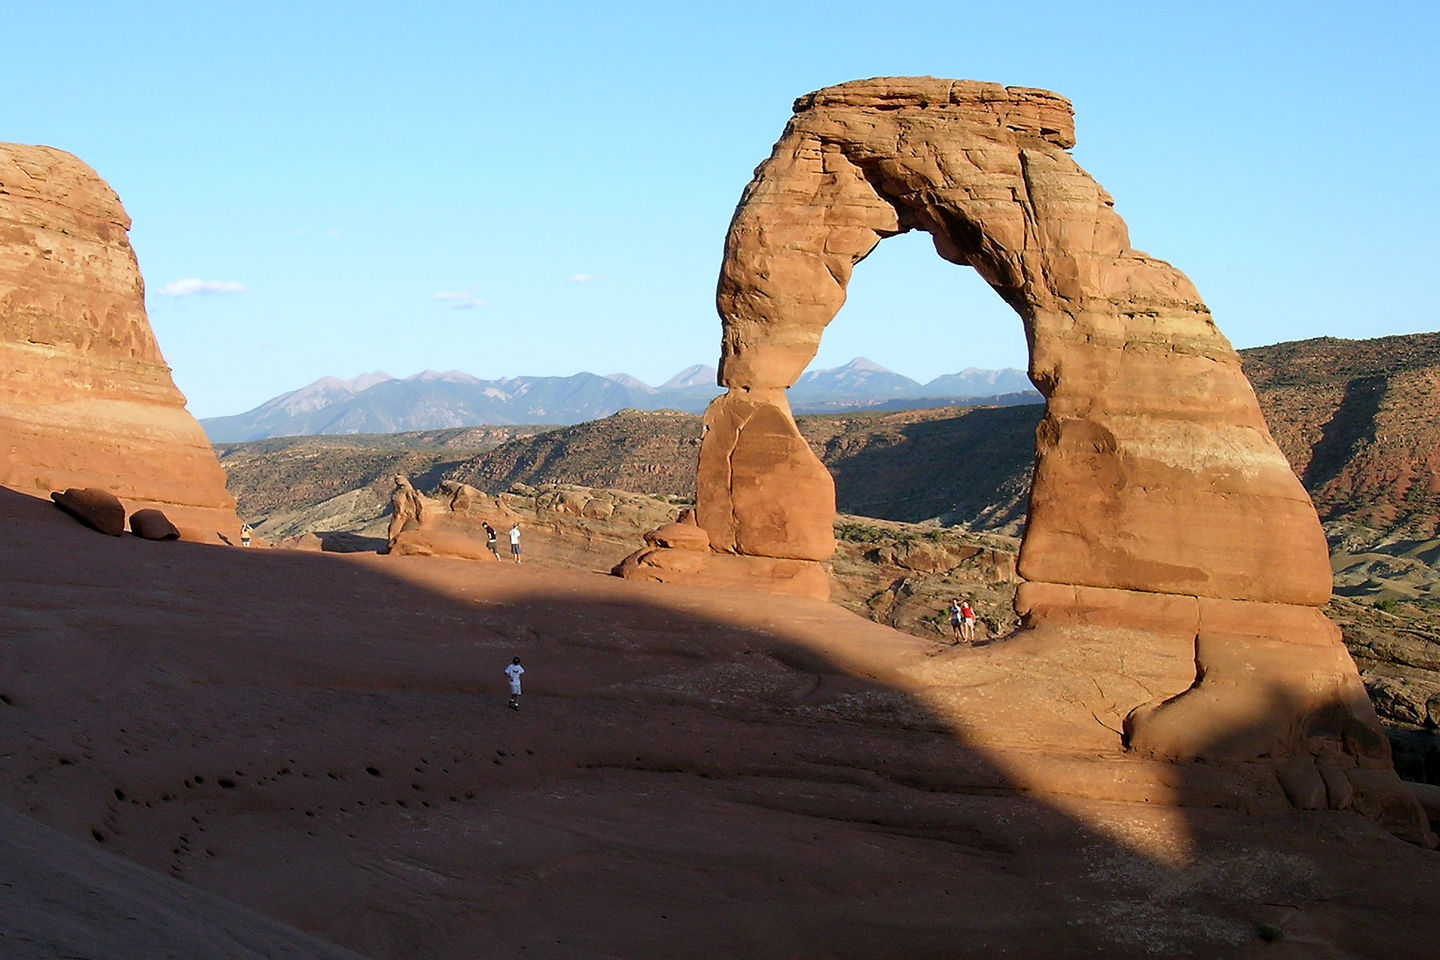 The classic Delicate Arch photograph